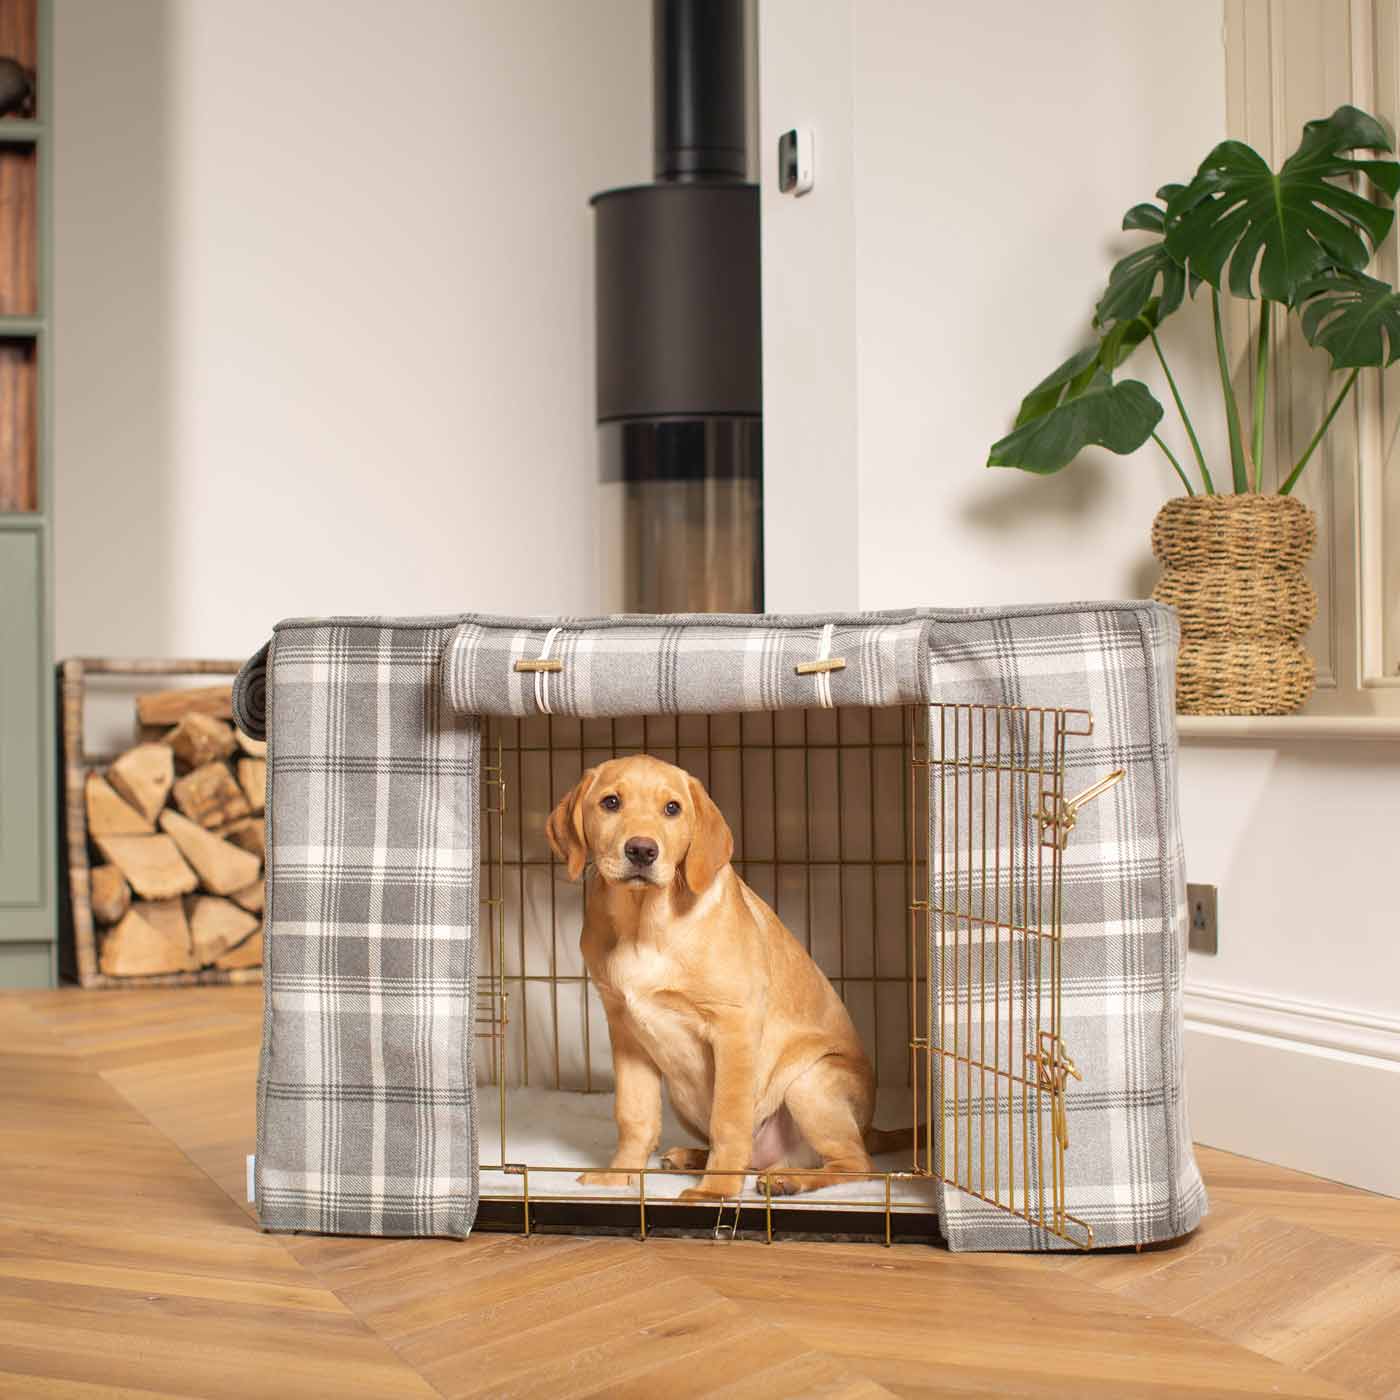 Luxury Gold Dog Cage Cover, with Balmoral Dove Grey Tweed Cage Cover The Perfect Dog Cage Accessory, Available To Personalize Now at Lords & Labradors US